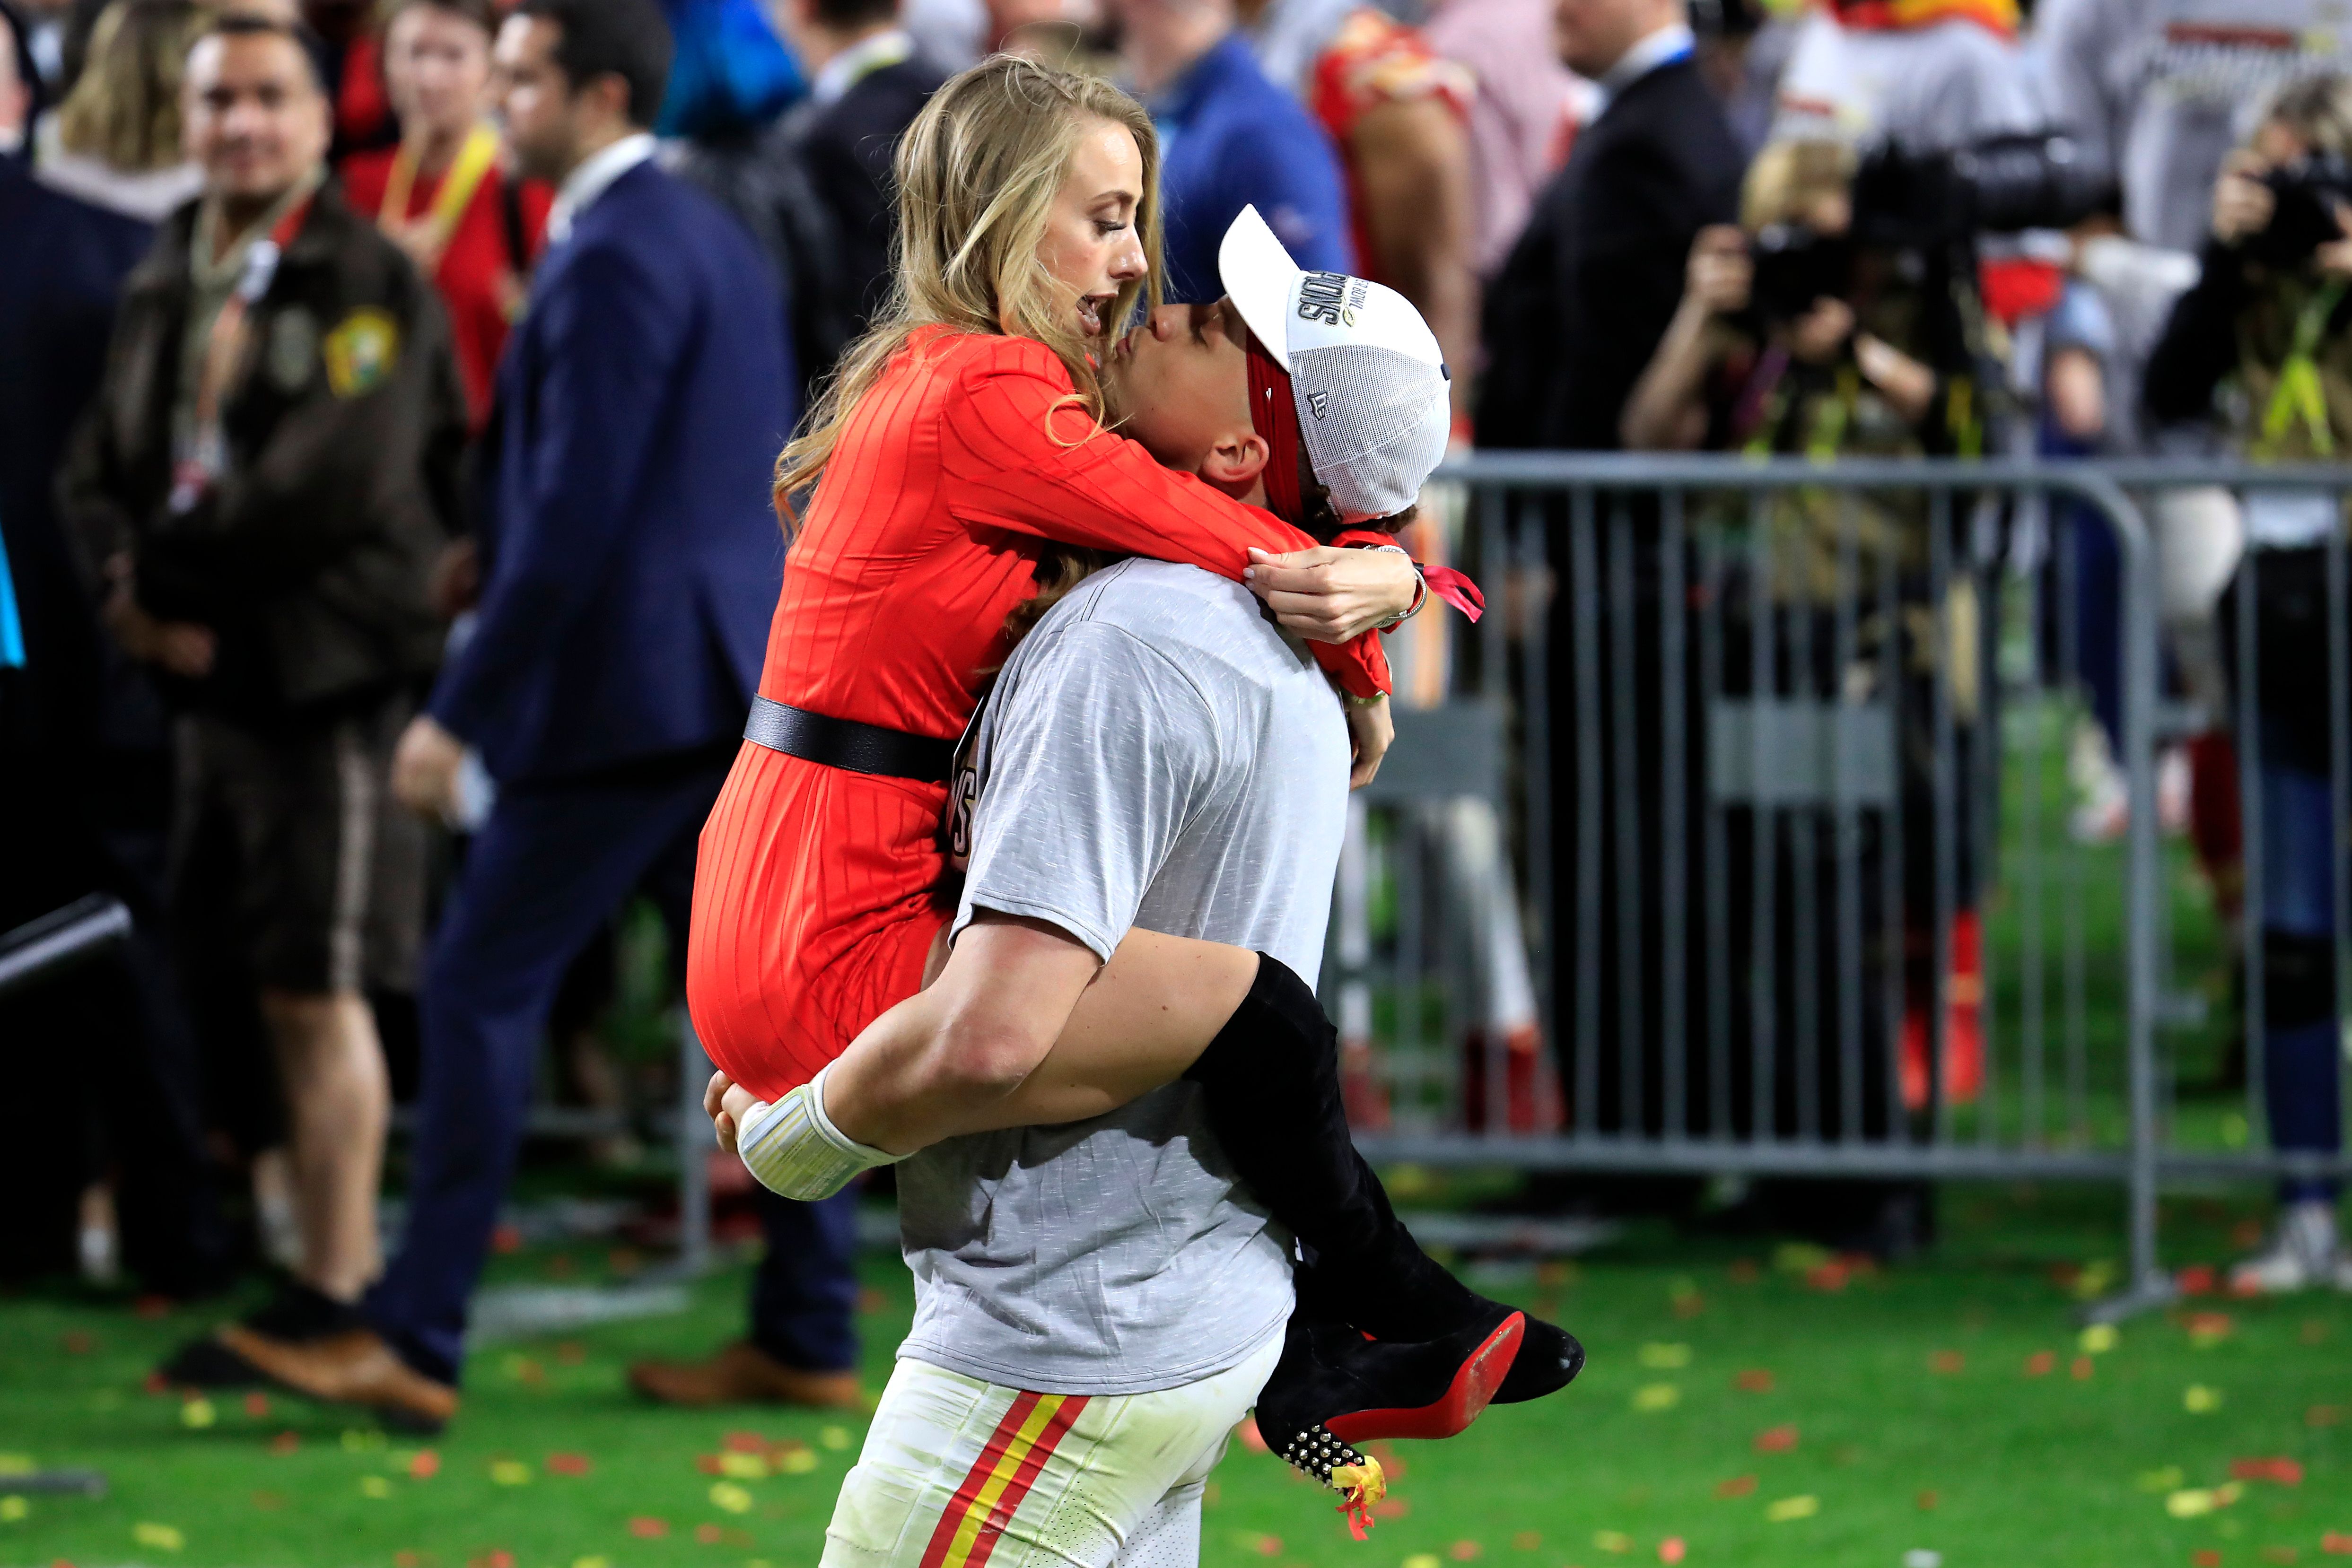  Patrick Mahomes celebrates with girlfriend, Brittany Matthews, after winning the 2020 Super Bowl in Miami | Source: Getty Images